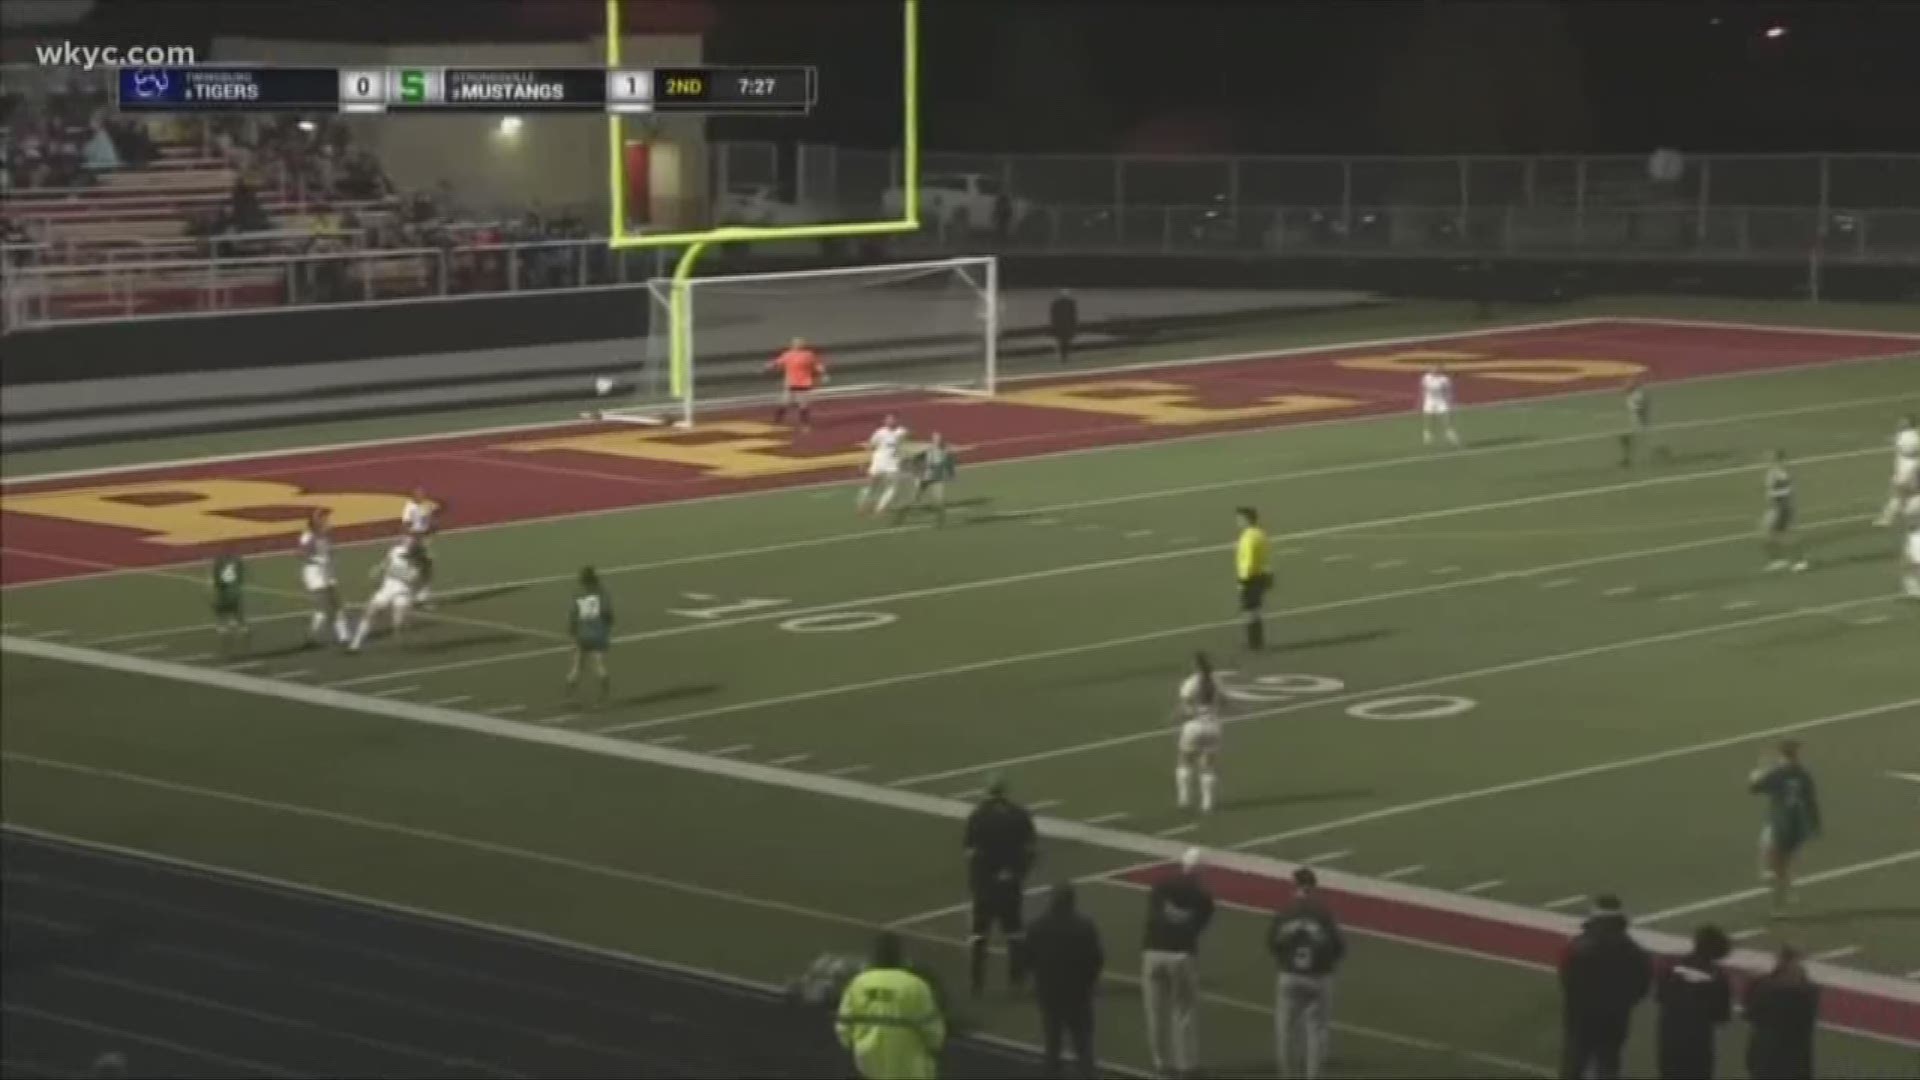 Strongsville girls soccer loses state title following 'extra player' controversy